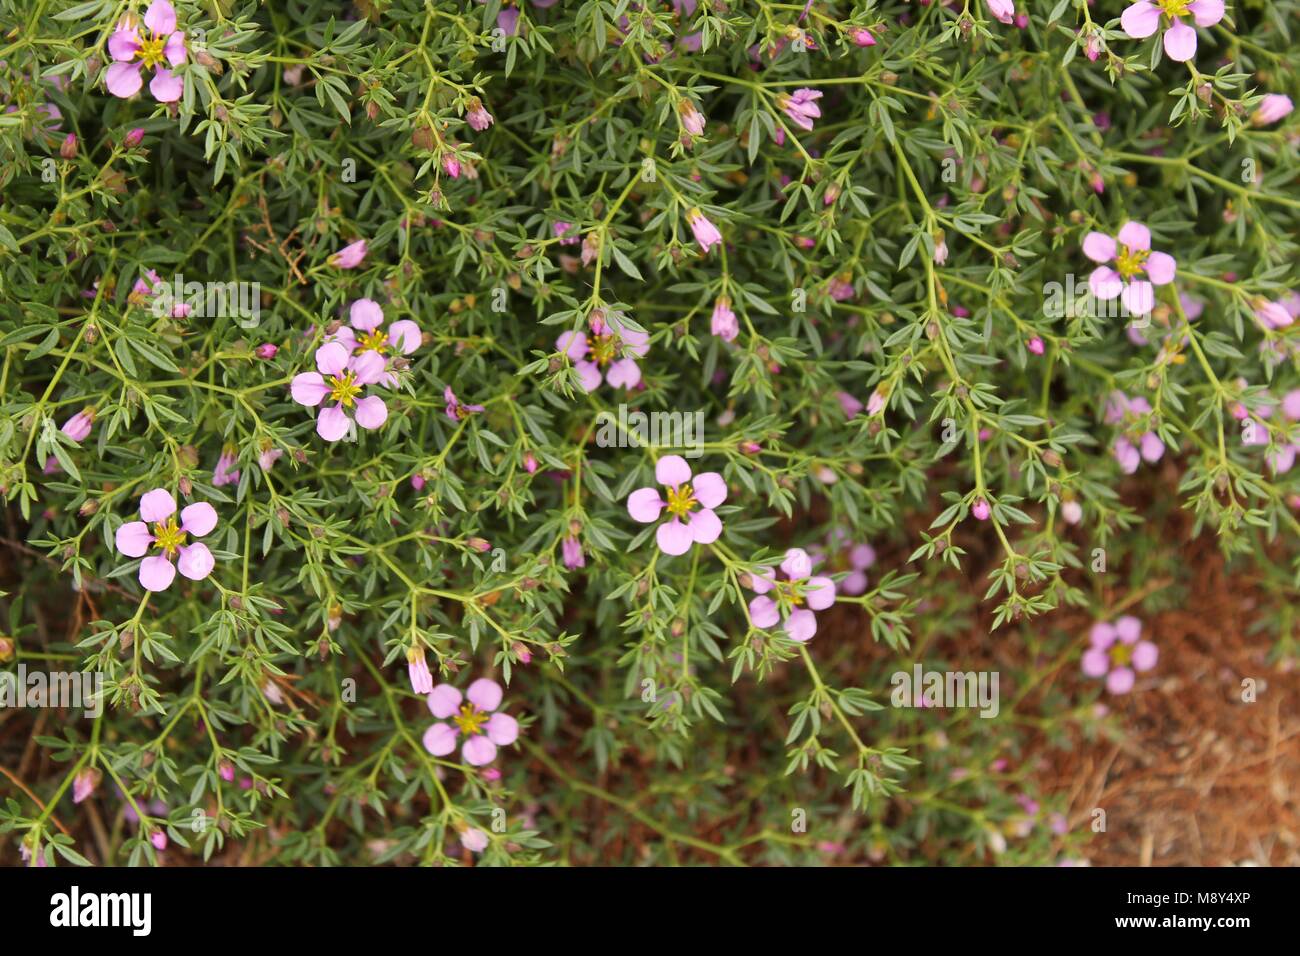 Fagonia Laevis purple flowers in the countryside in spring Stock Photo